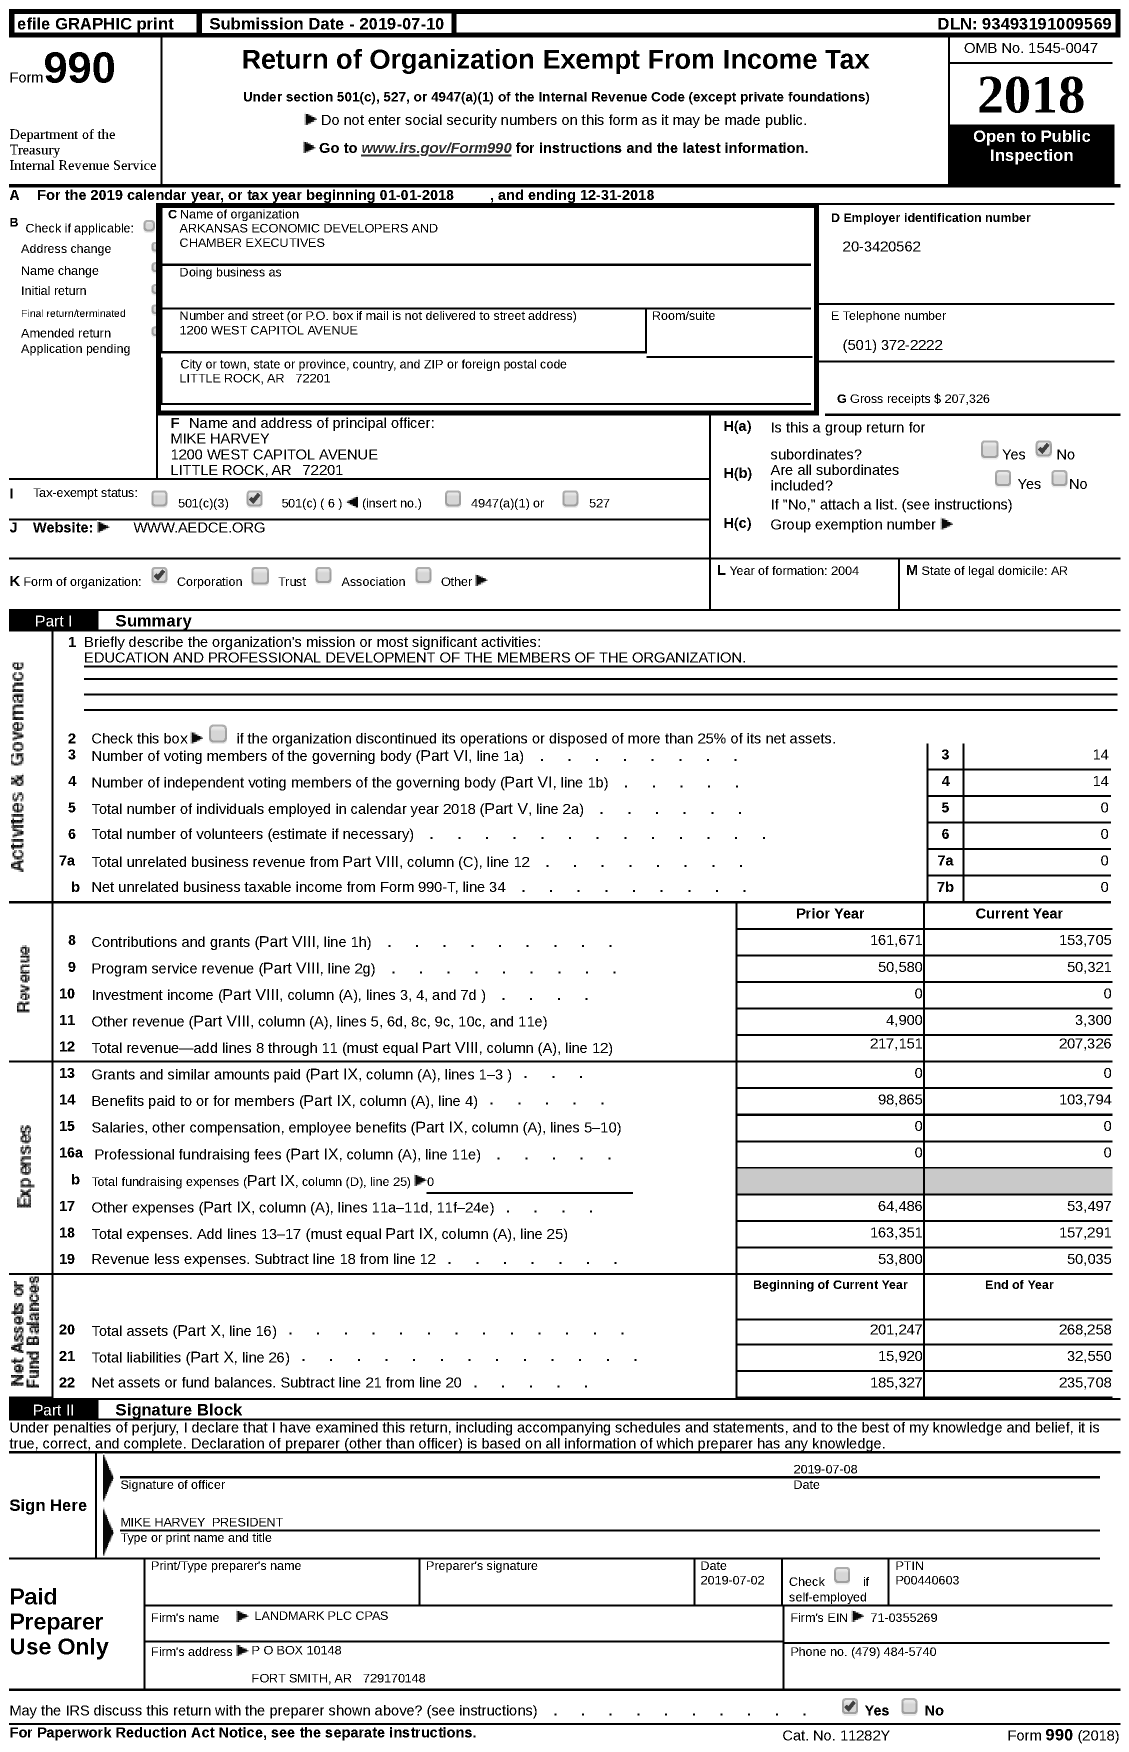 Image of first page of 2018 Form 990 for Arkansas Economic Developers and Chamber Executives